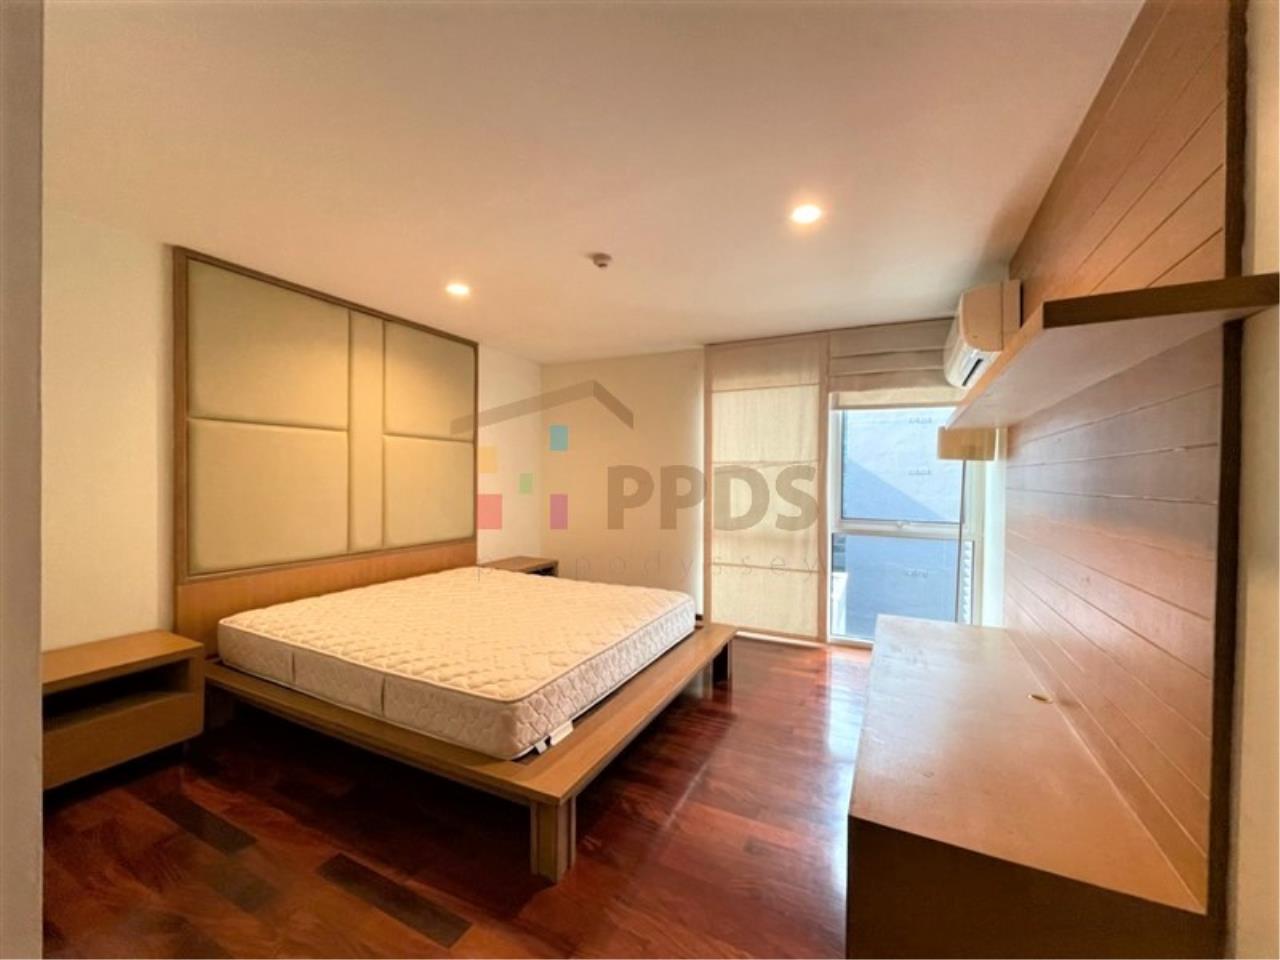 Propodyssey Agency's Two bedrooms for rent walking distance to NIST International school 5